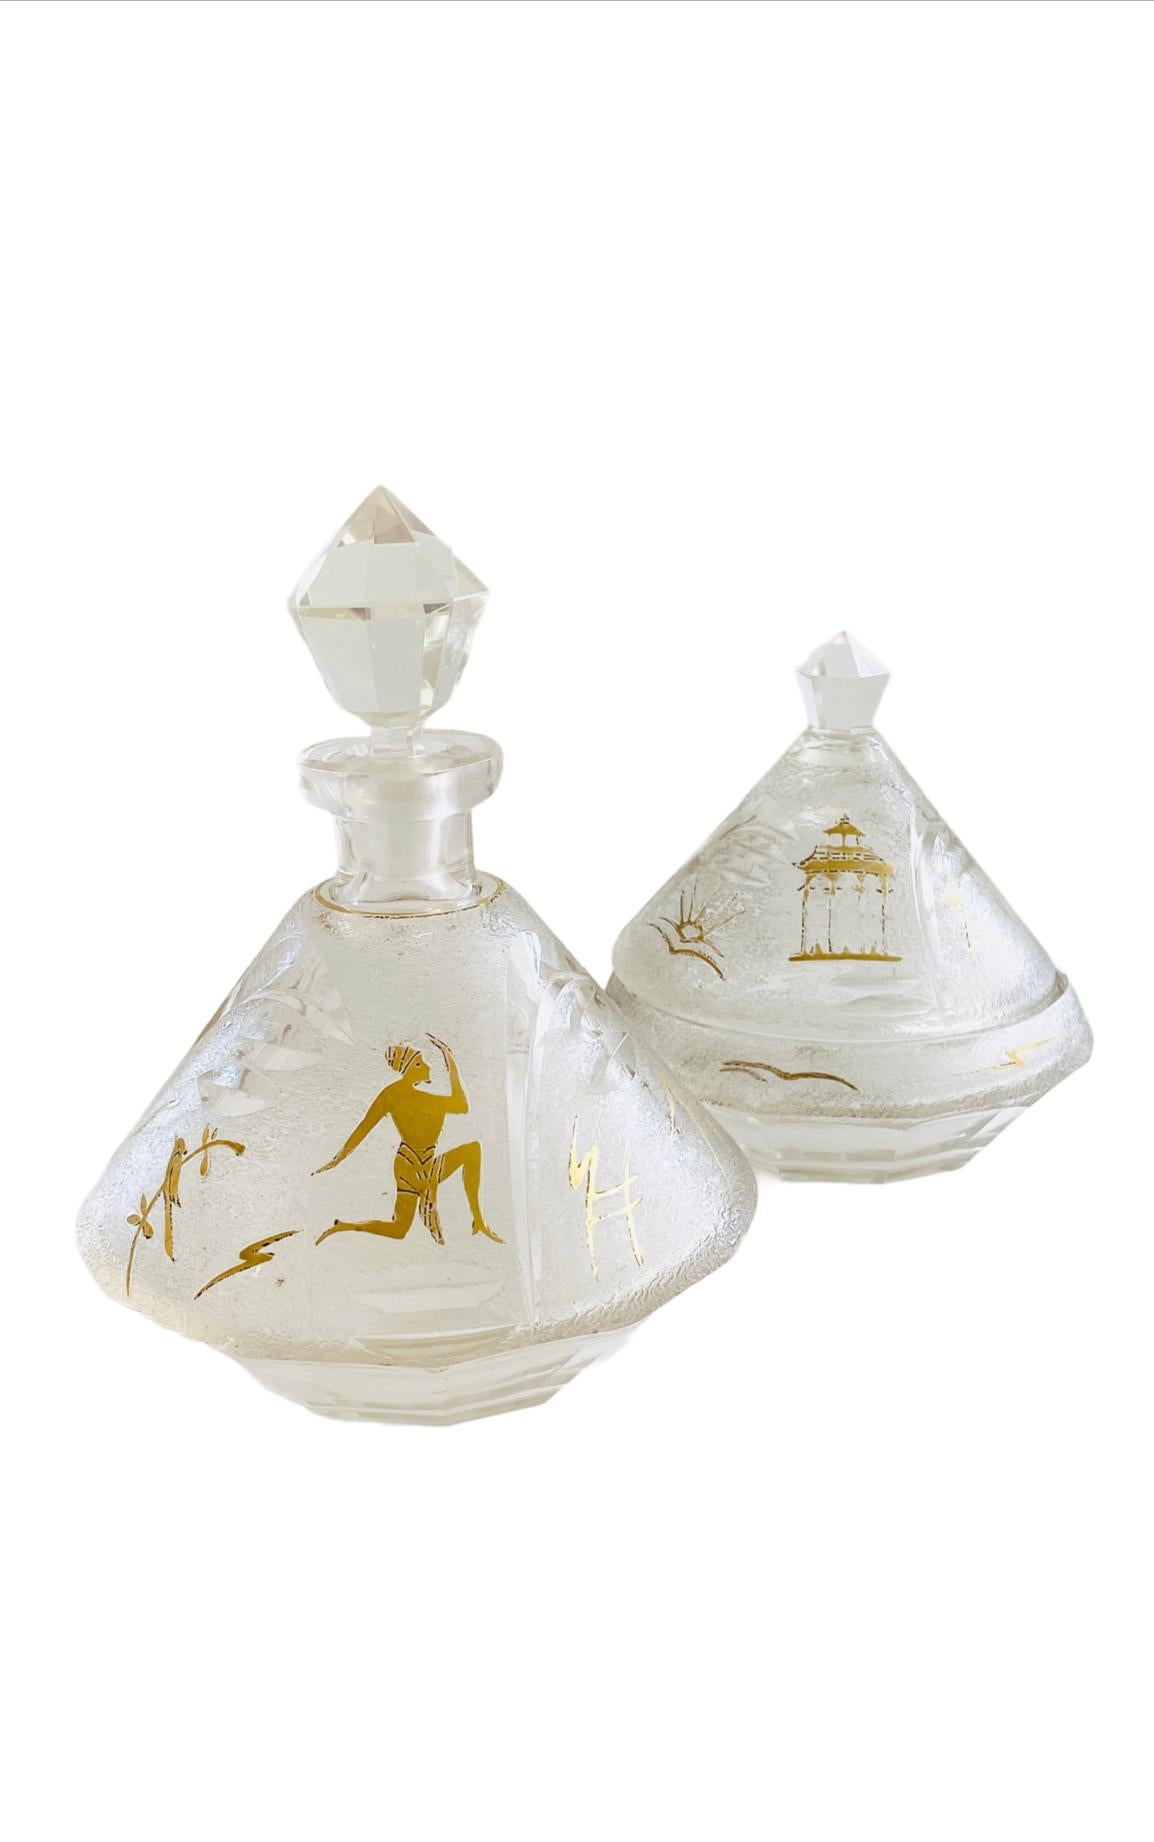 Rare crystal vanity perfume set featuring ancient gold hieroglyphs.

Size: The bottle measures 6